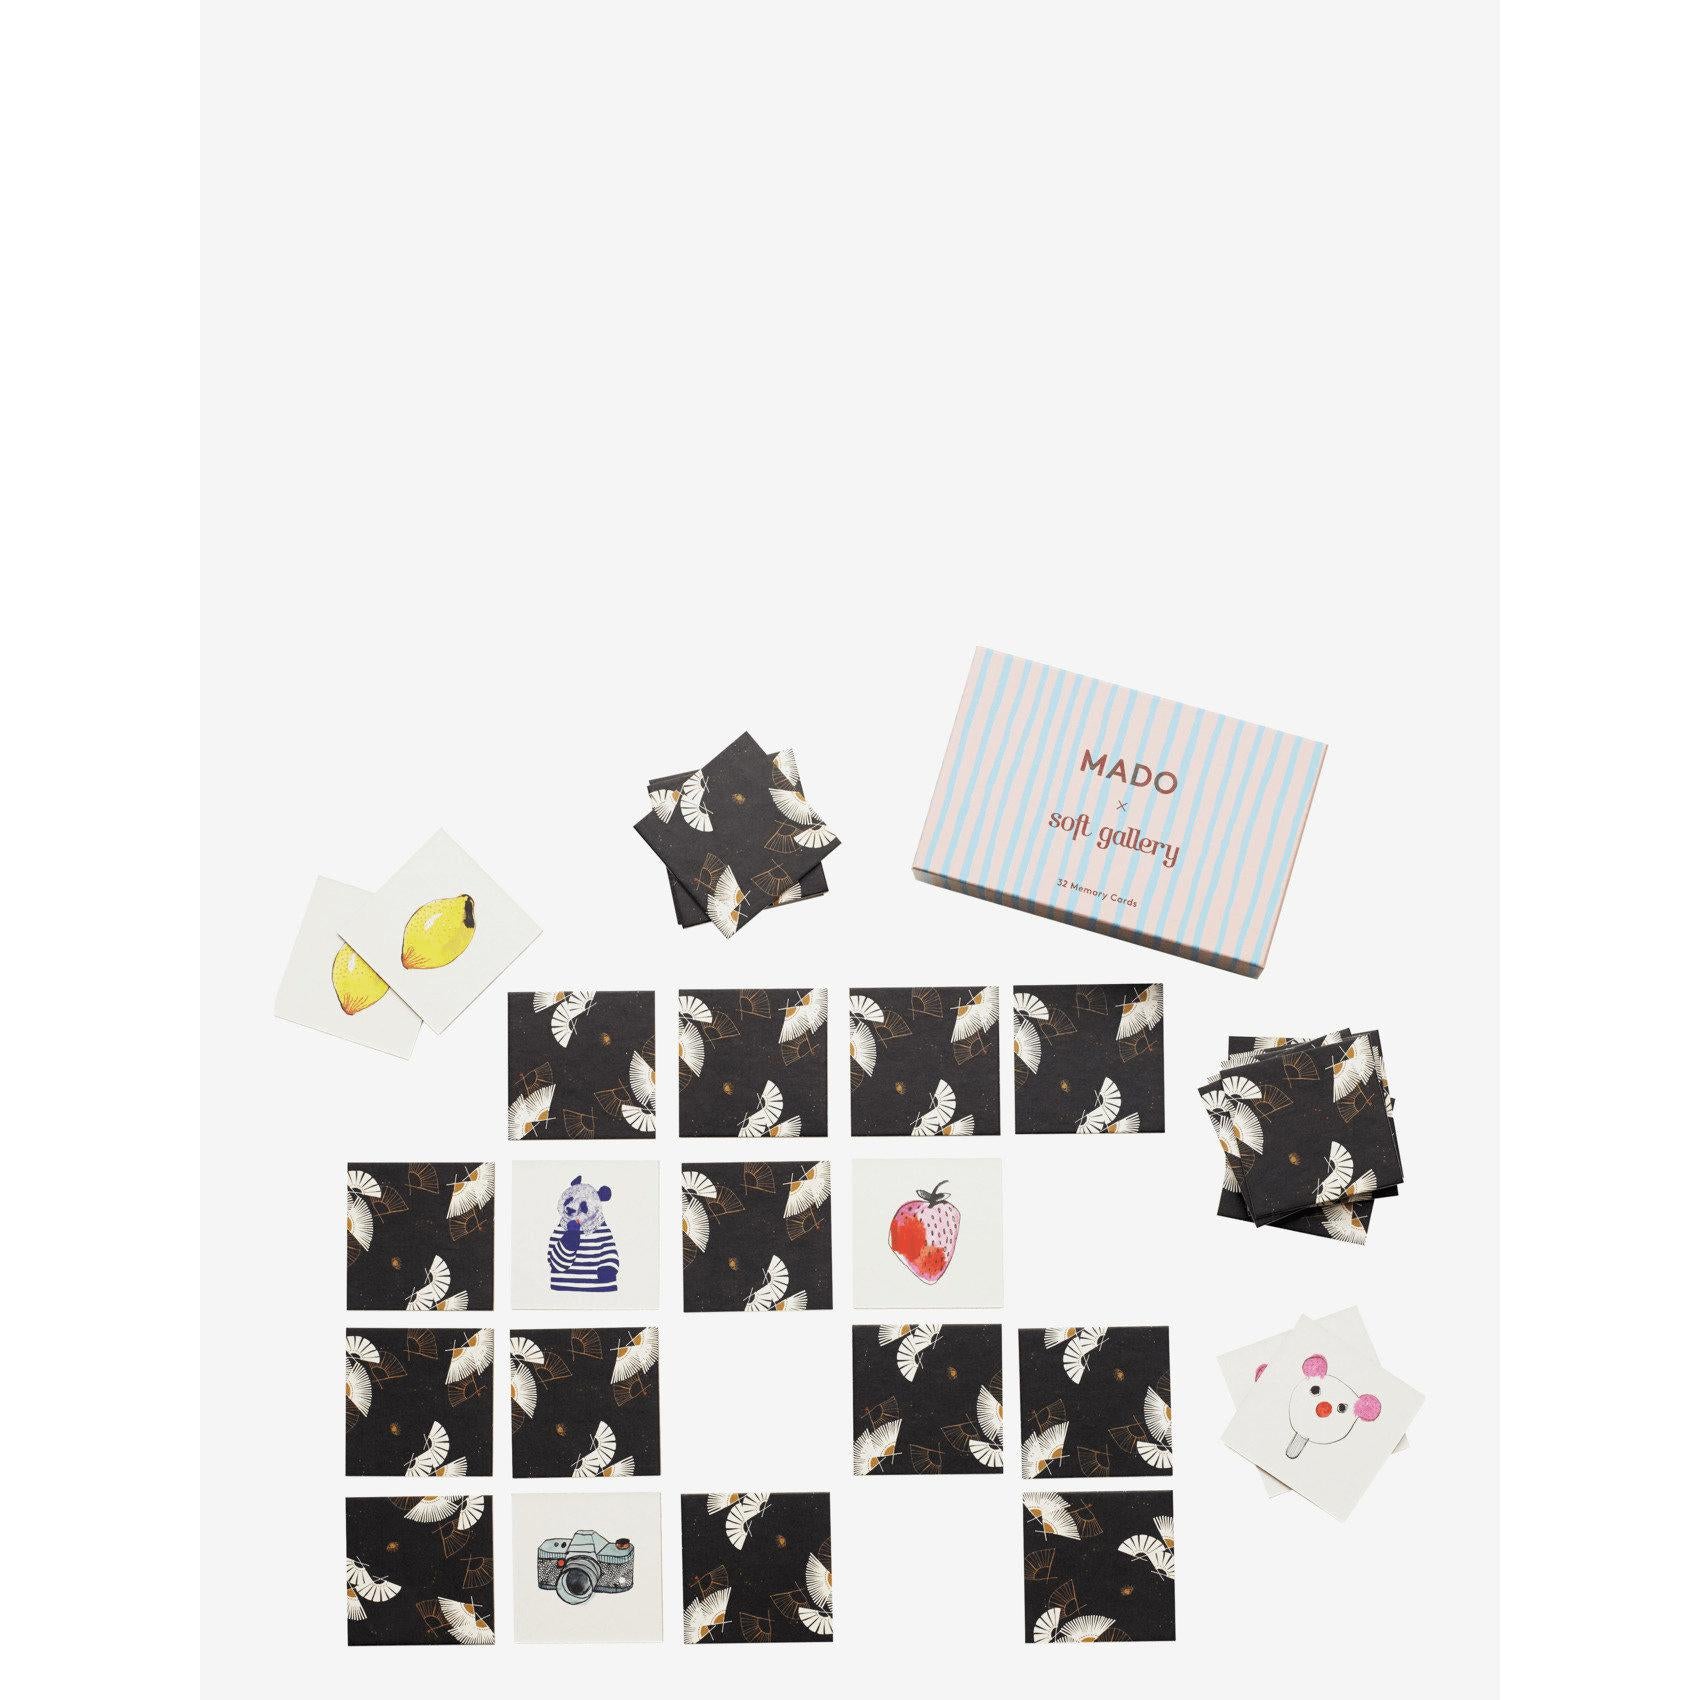 Paper Collective Mado X Soft Gallery Memory Games